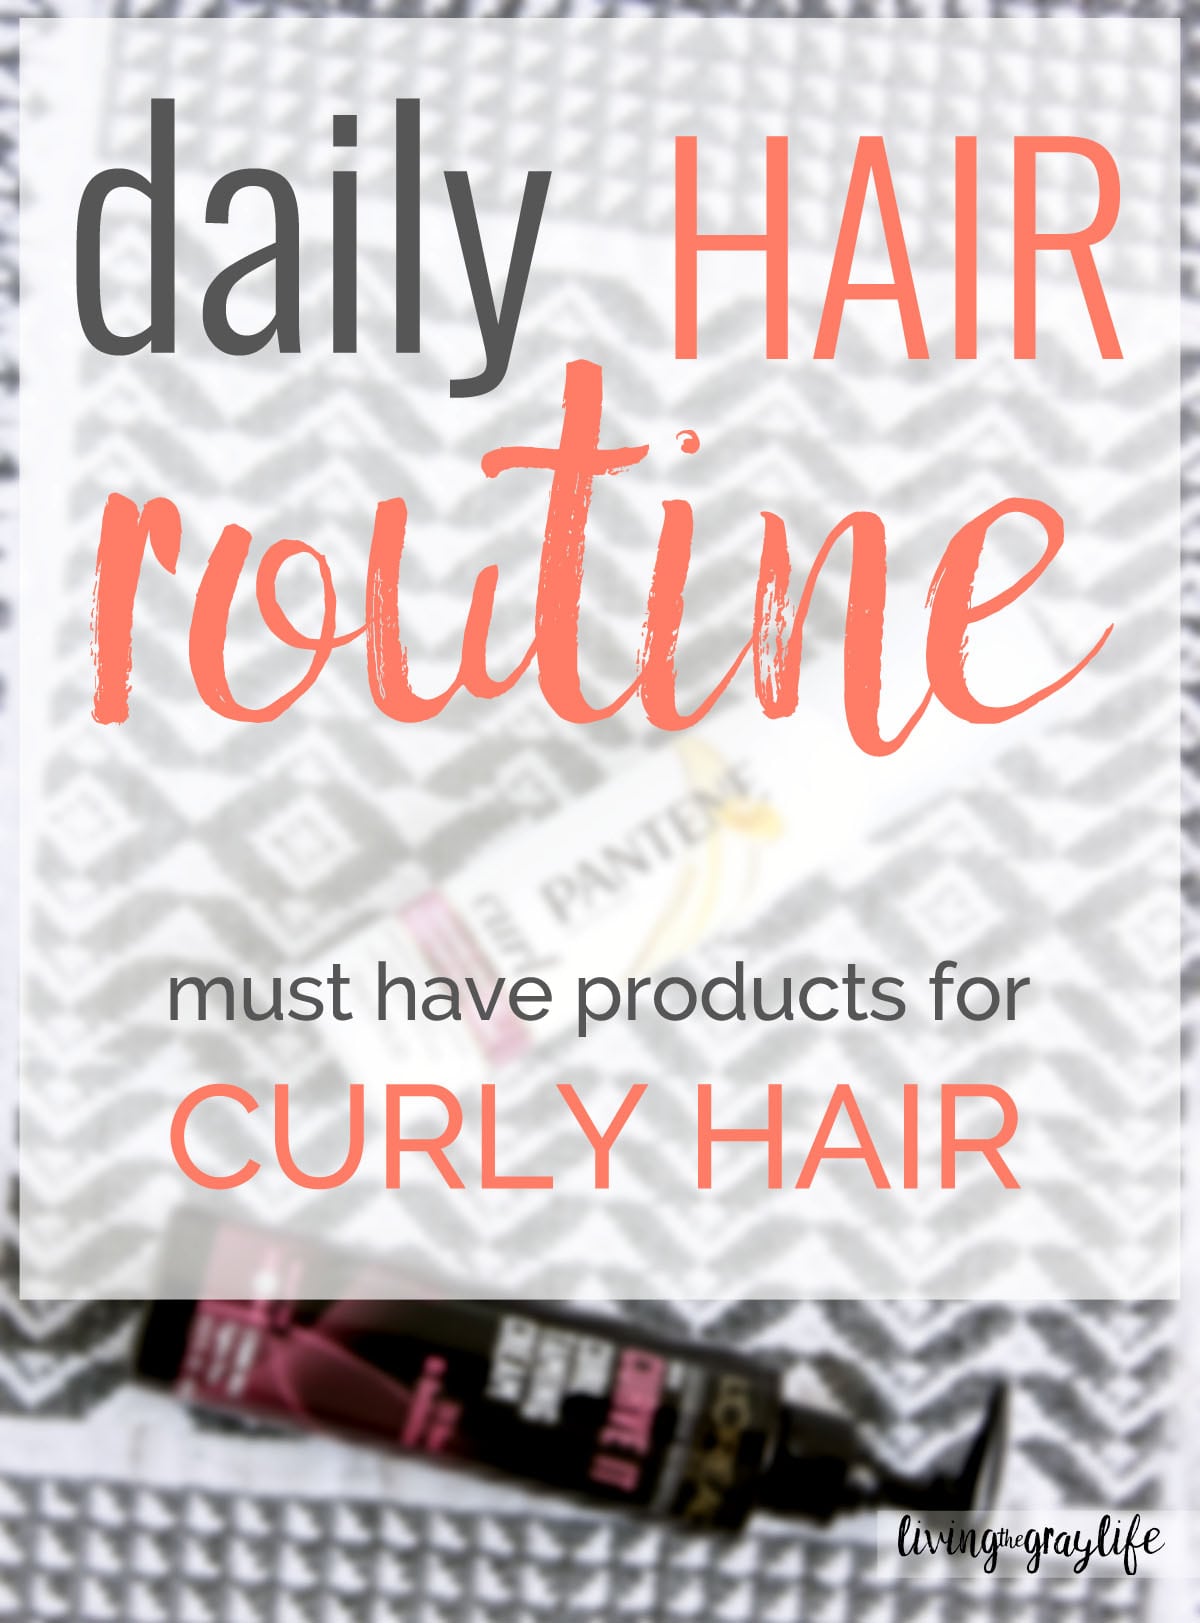 Daily curly hair routine - products & techniques